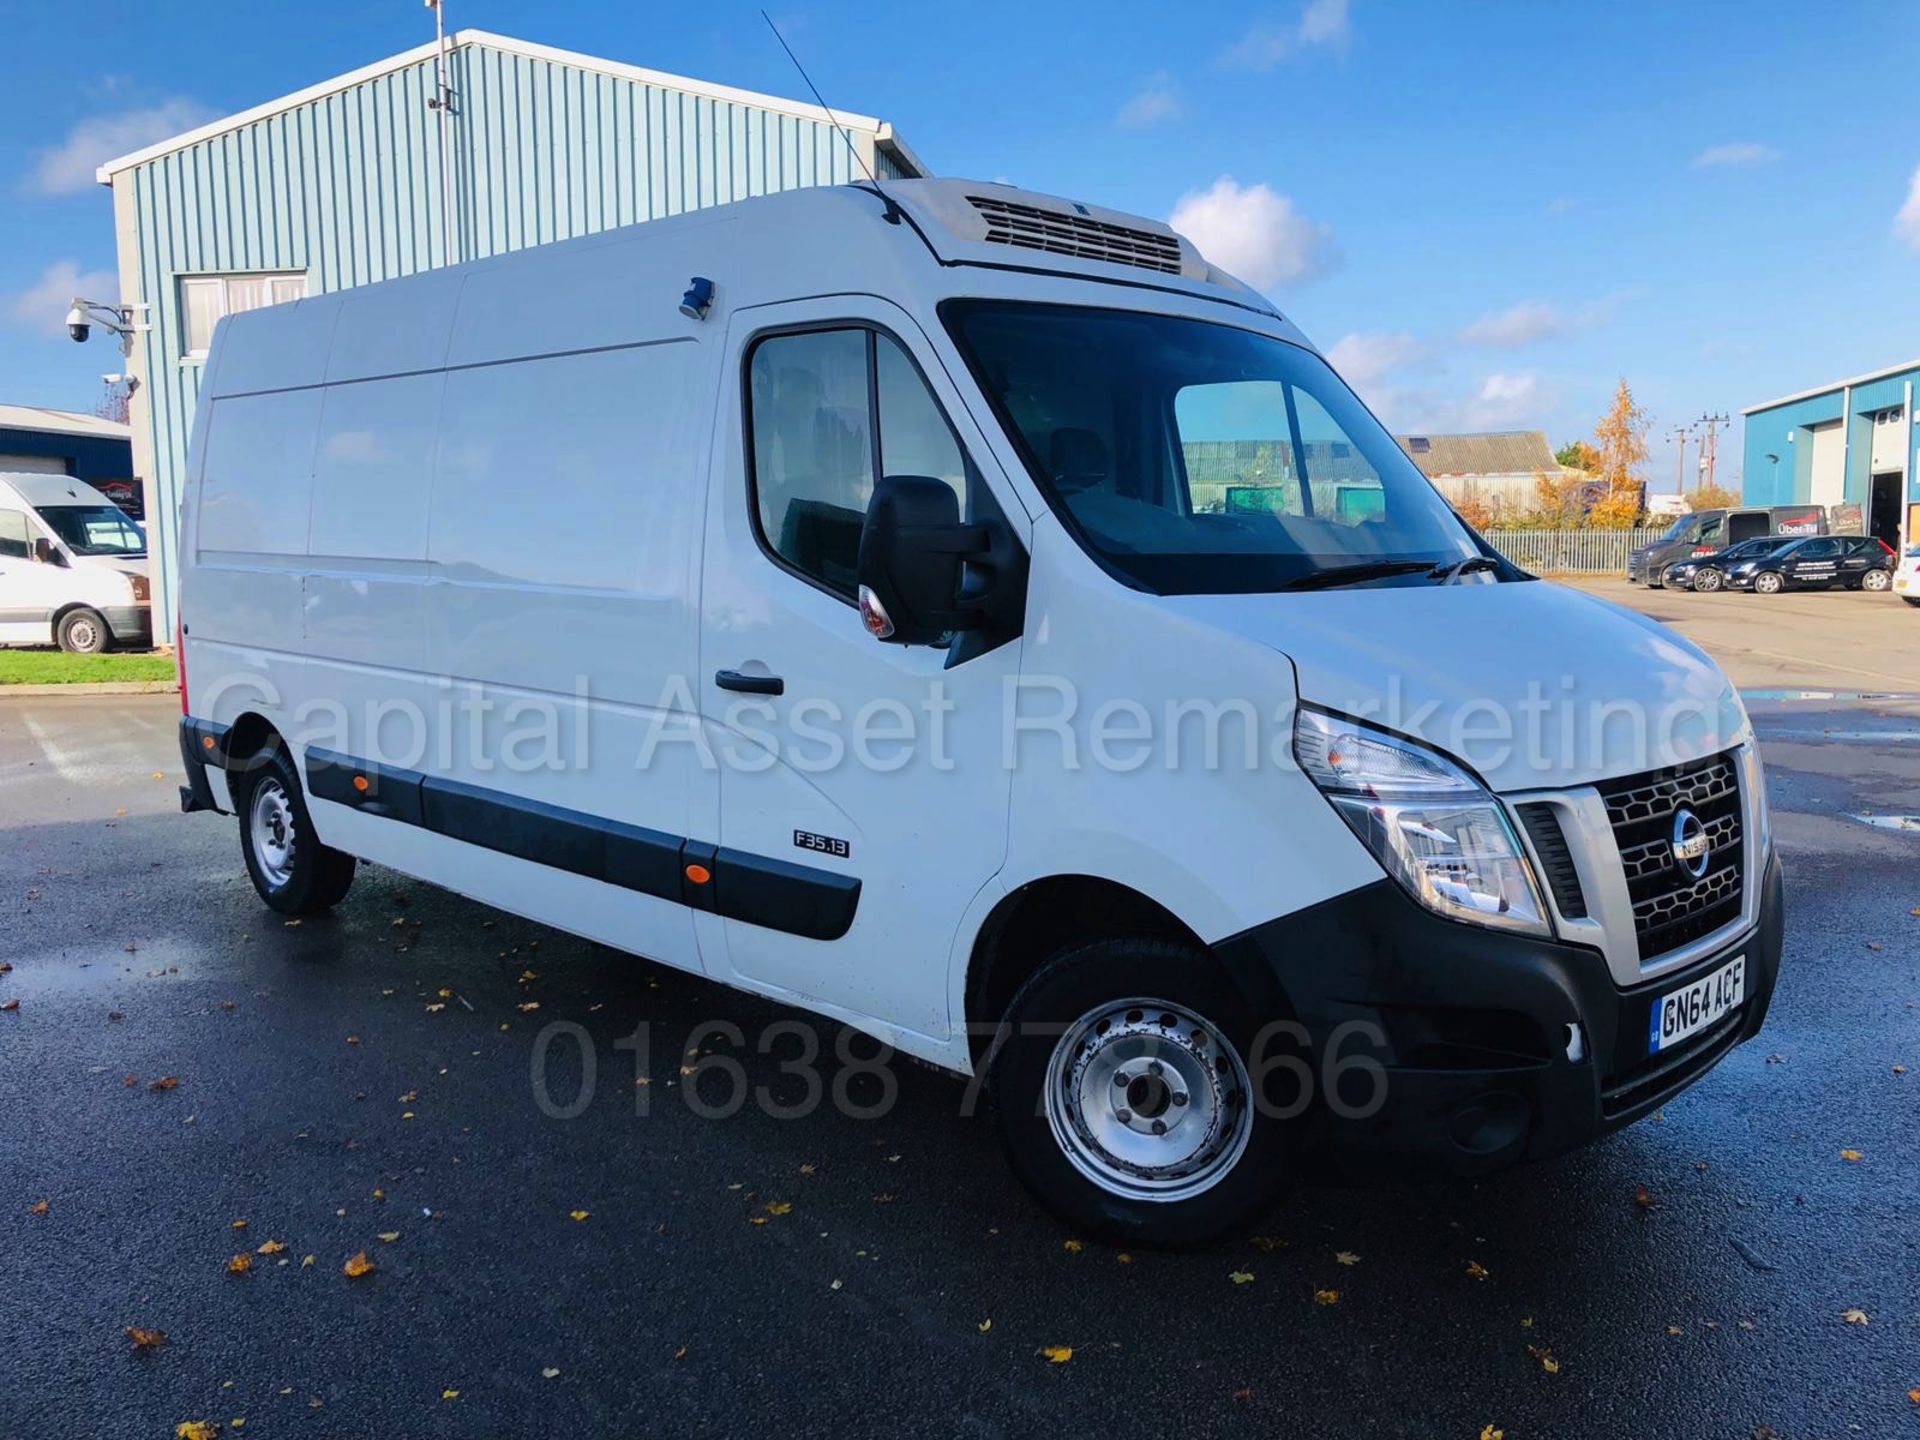 (On Sale) NISSAN NV400 *LWB -REFRIGERATED / PANEL VAN* (2015 MODEL) '2.3 DCI- 6 SPEED' *THERMO KING*